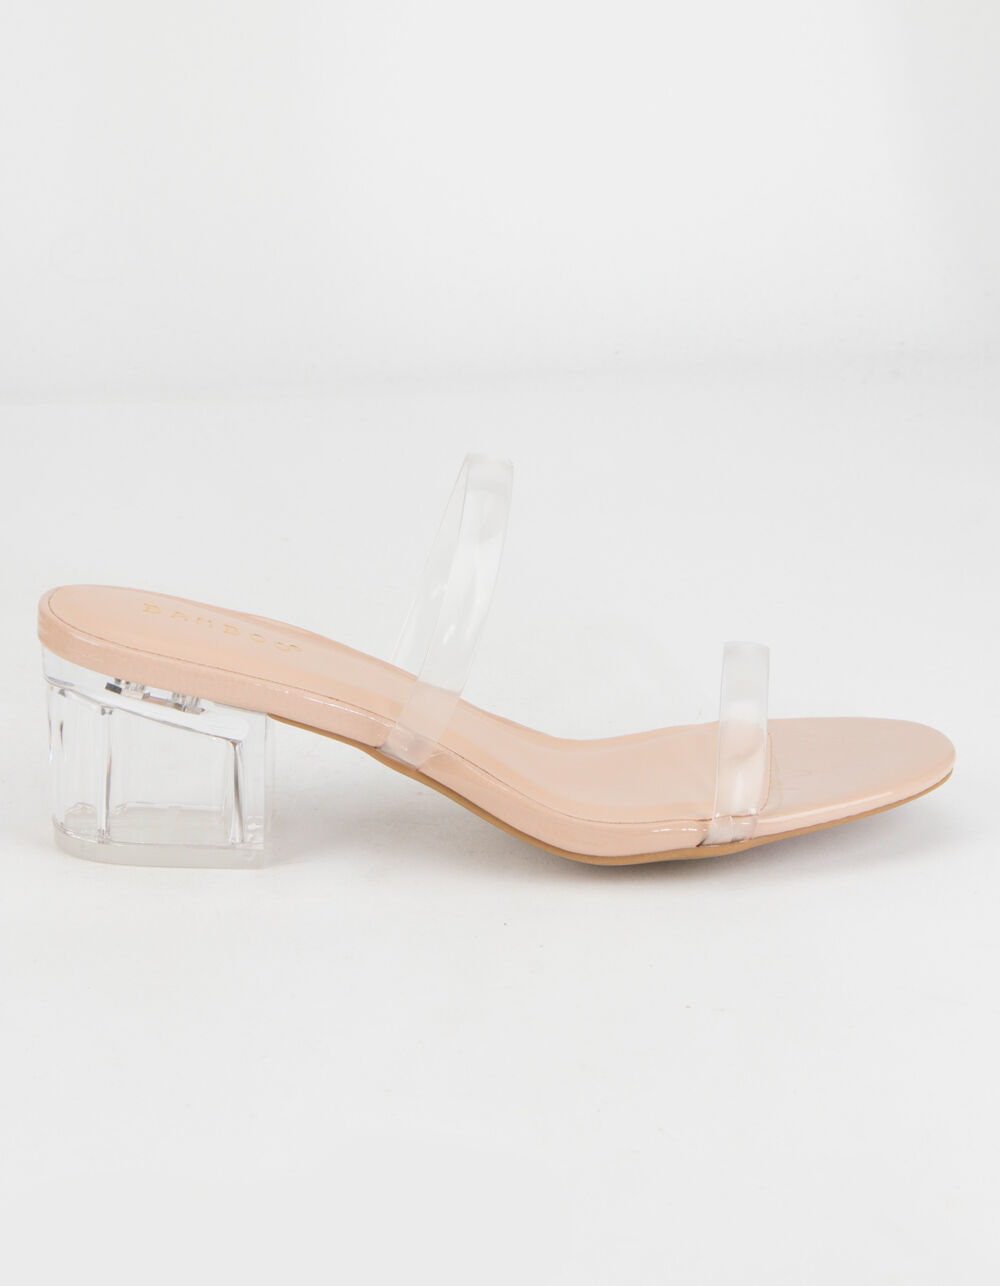 BAMBOO Lucite Double Strap Womens Heels - NUDE | Tillys